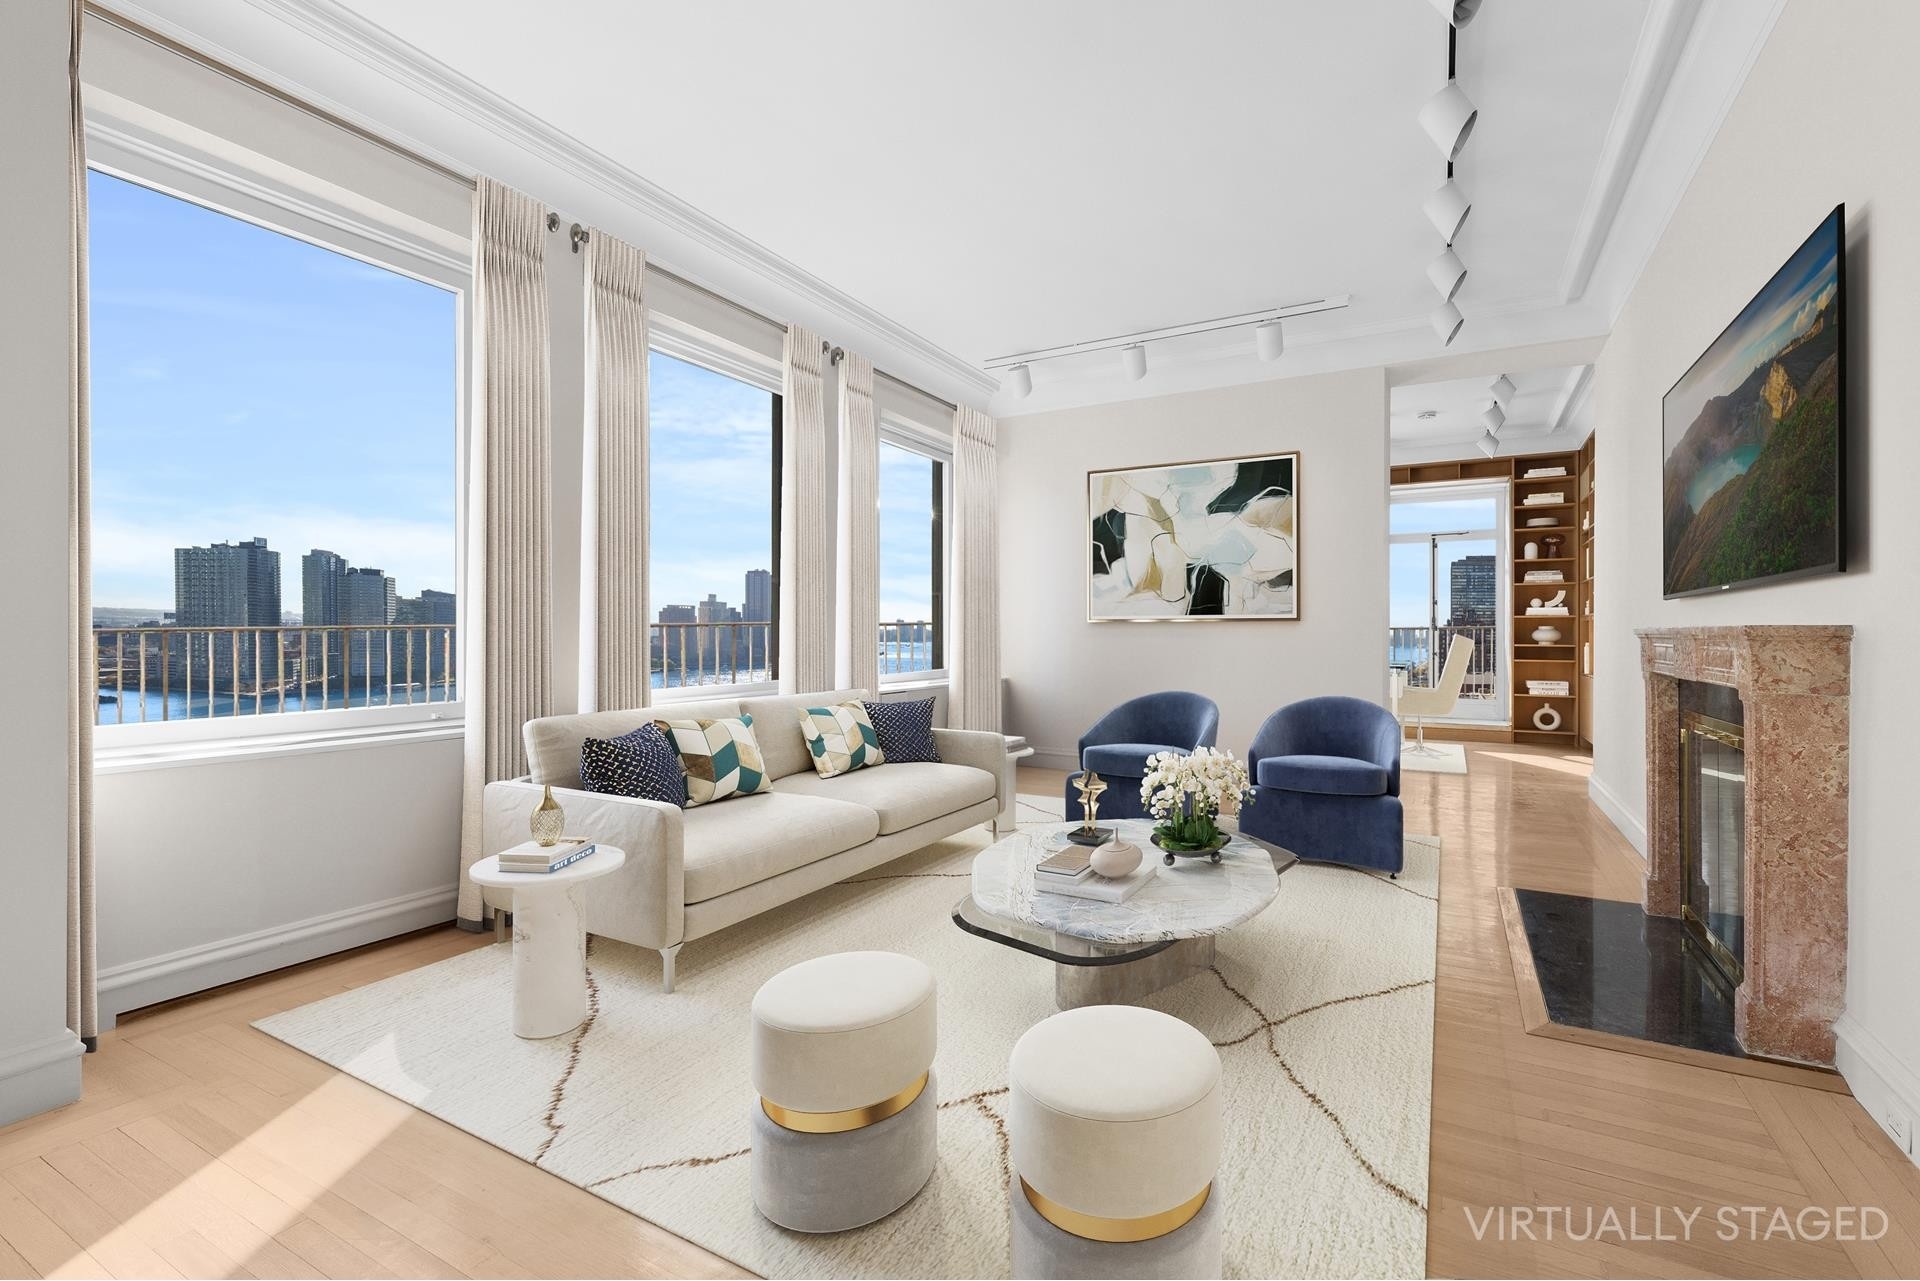 Co-op Properties for Sale at RIVER HOUSE, 435 E 52ND ST, 15A Beekman, New York, NY 10022